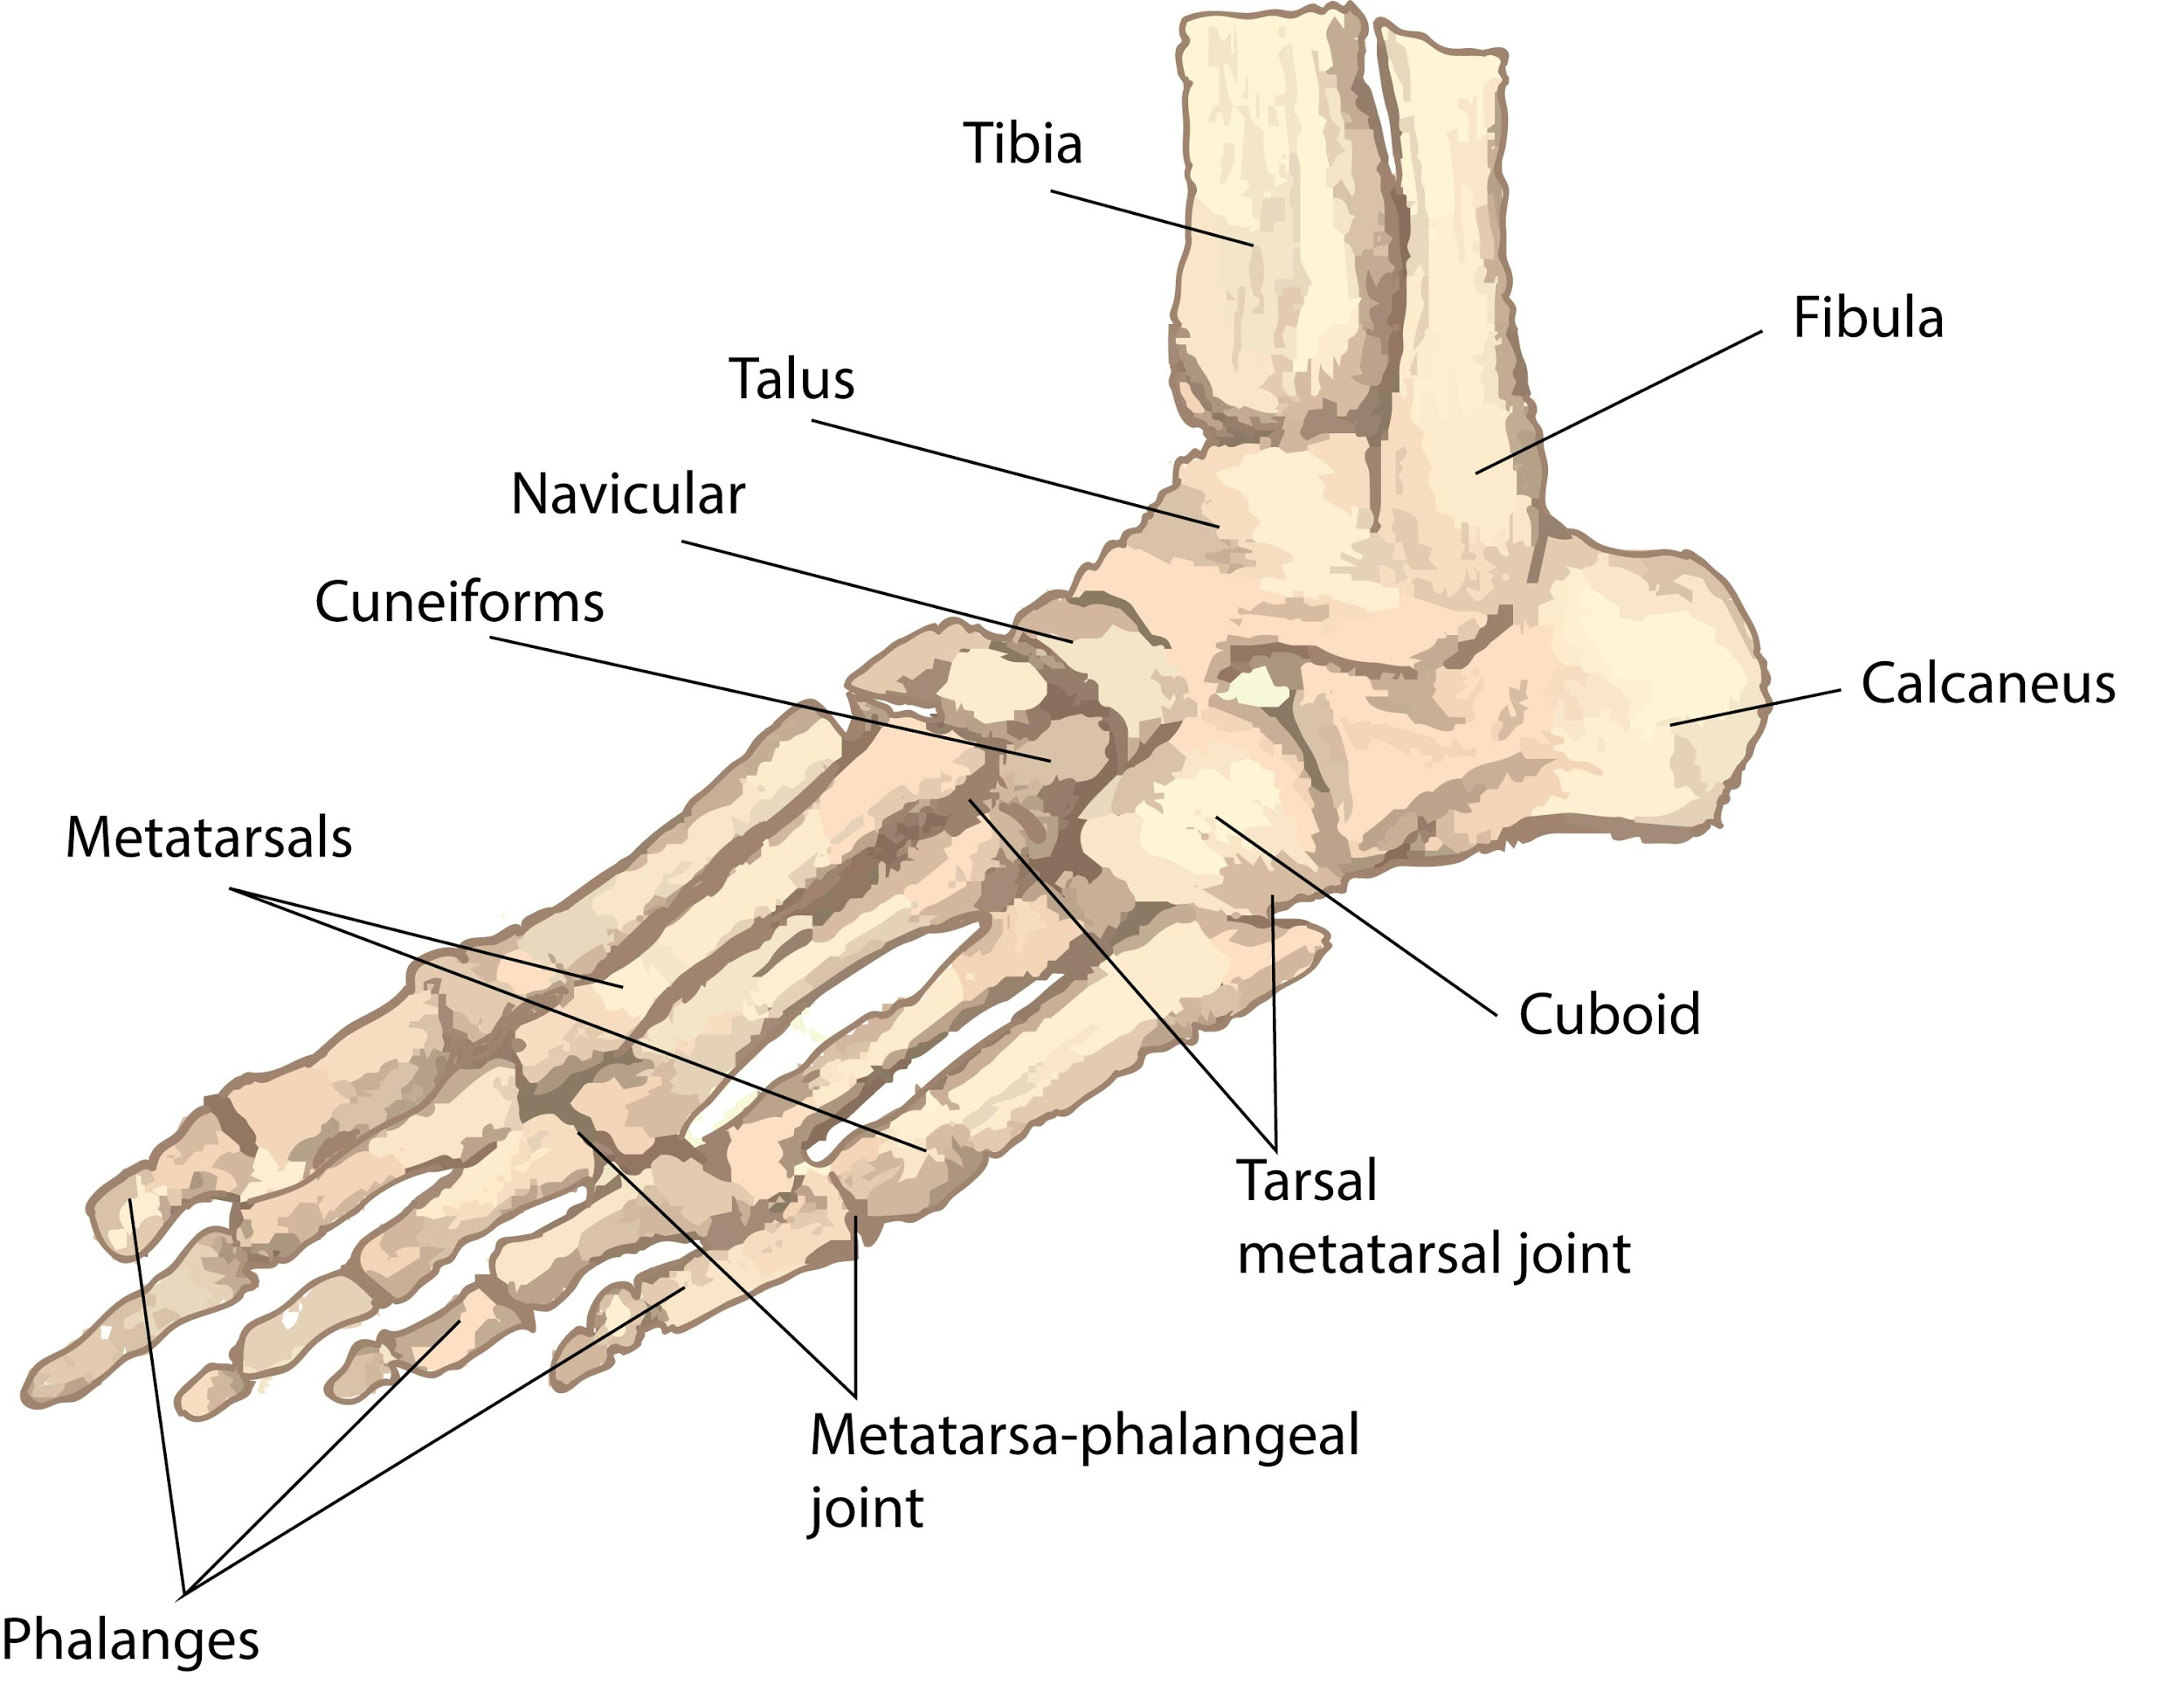 The number of tarsals per limb of human beings is(a) 5(b) 6 (c) 7(d) 8